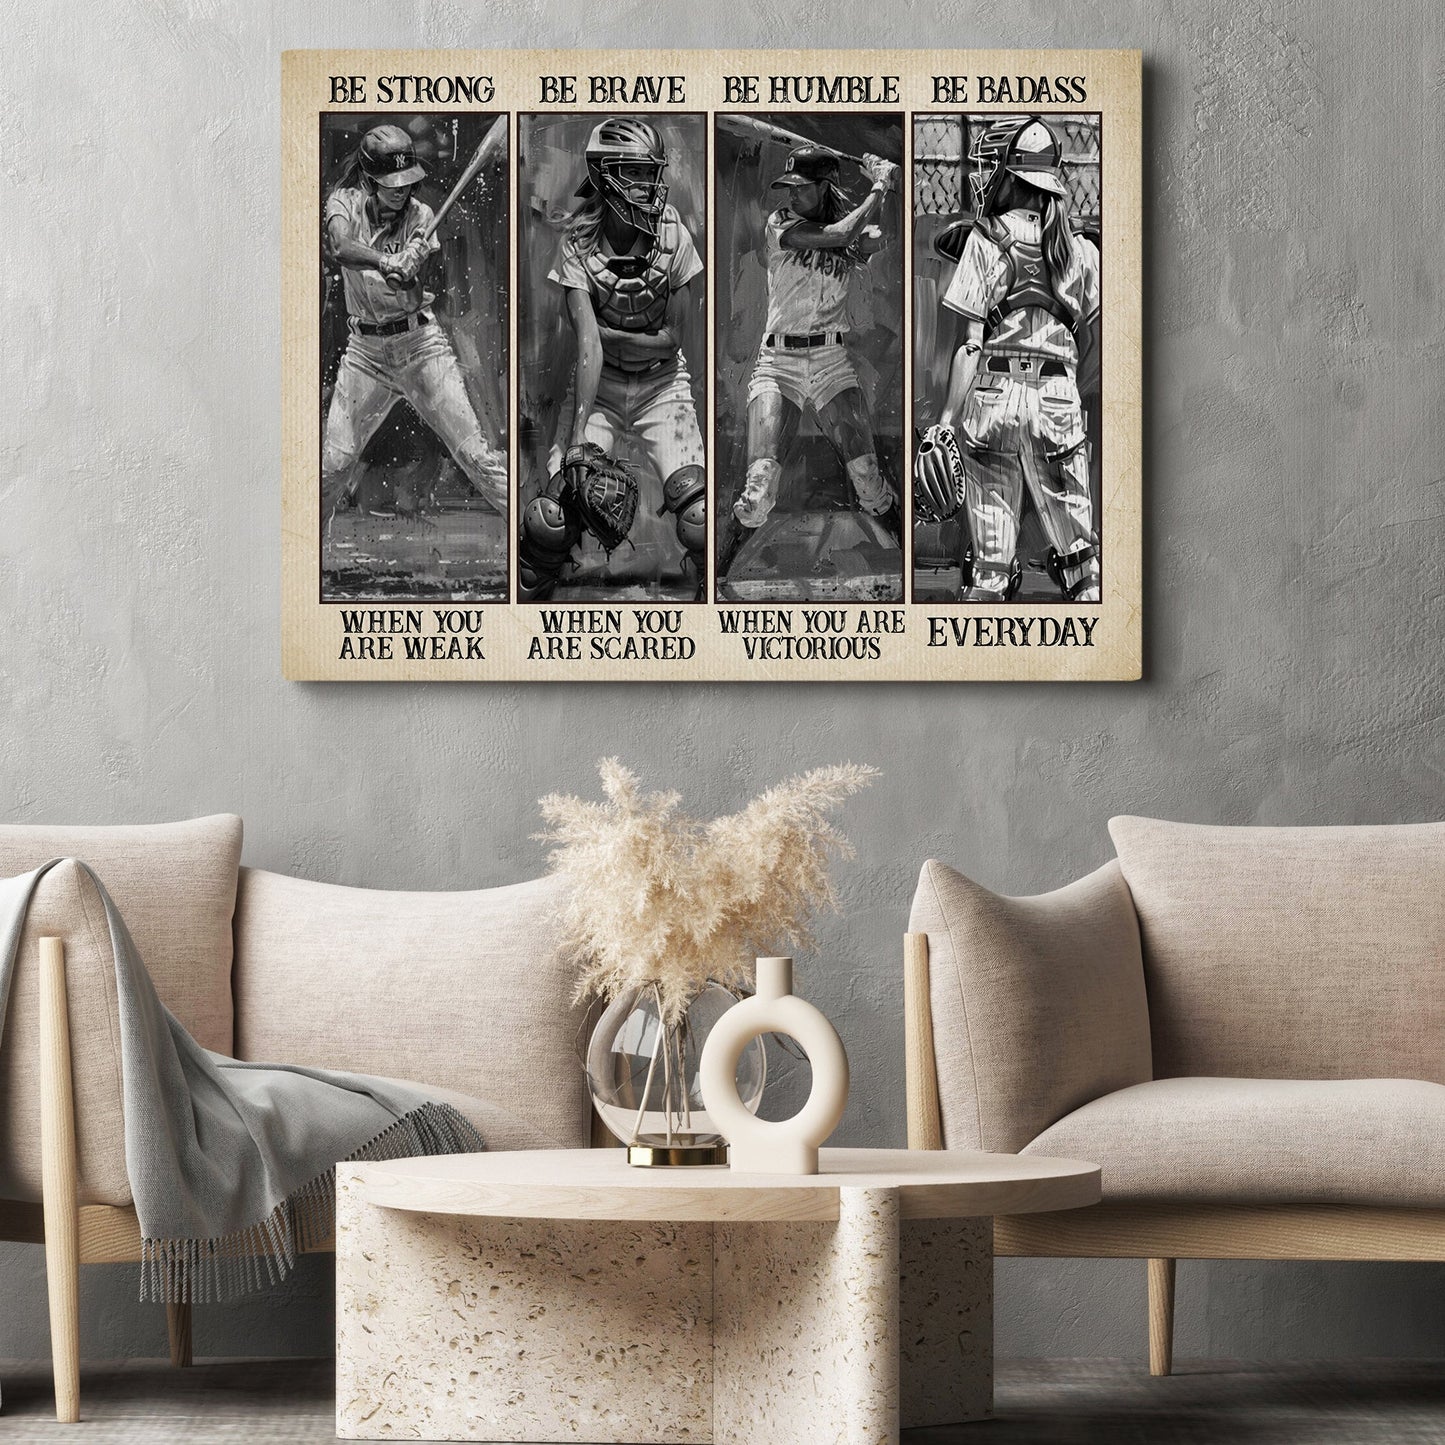 Be Strong Be Brave Be Humble Be Badass, Softball Girl Canvas Painting, Inspirational Quotes Softball Wall Art Decor, Poster Gift For Softball Lovers